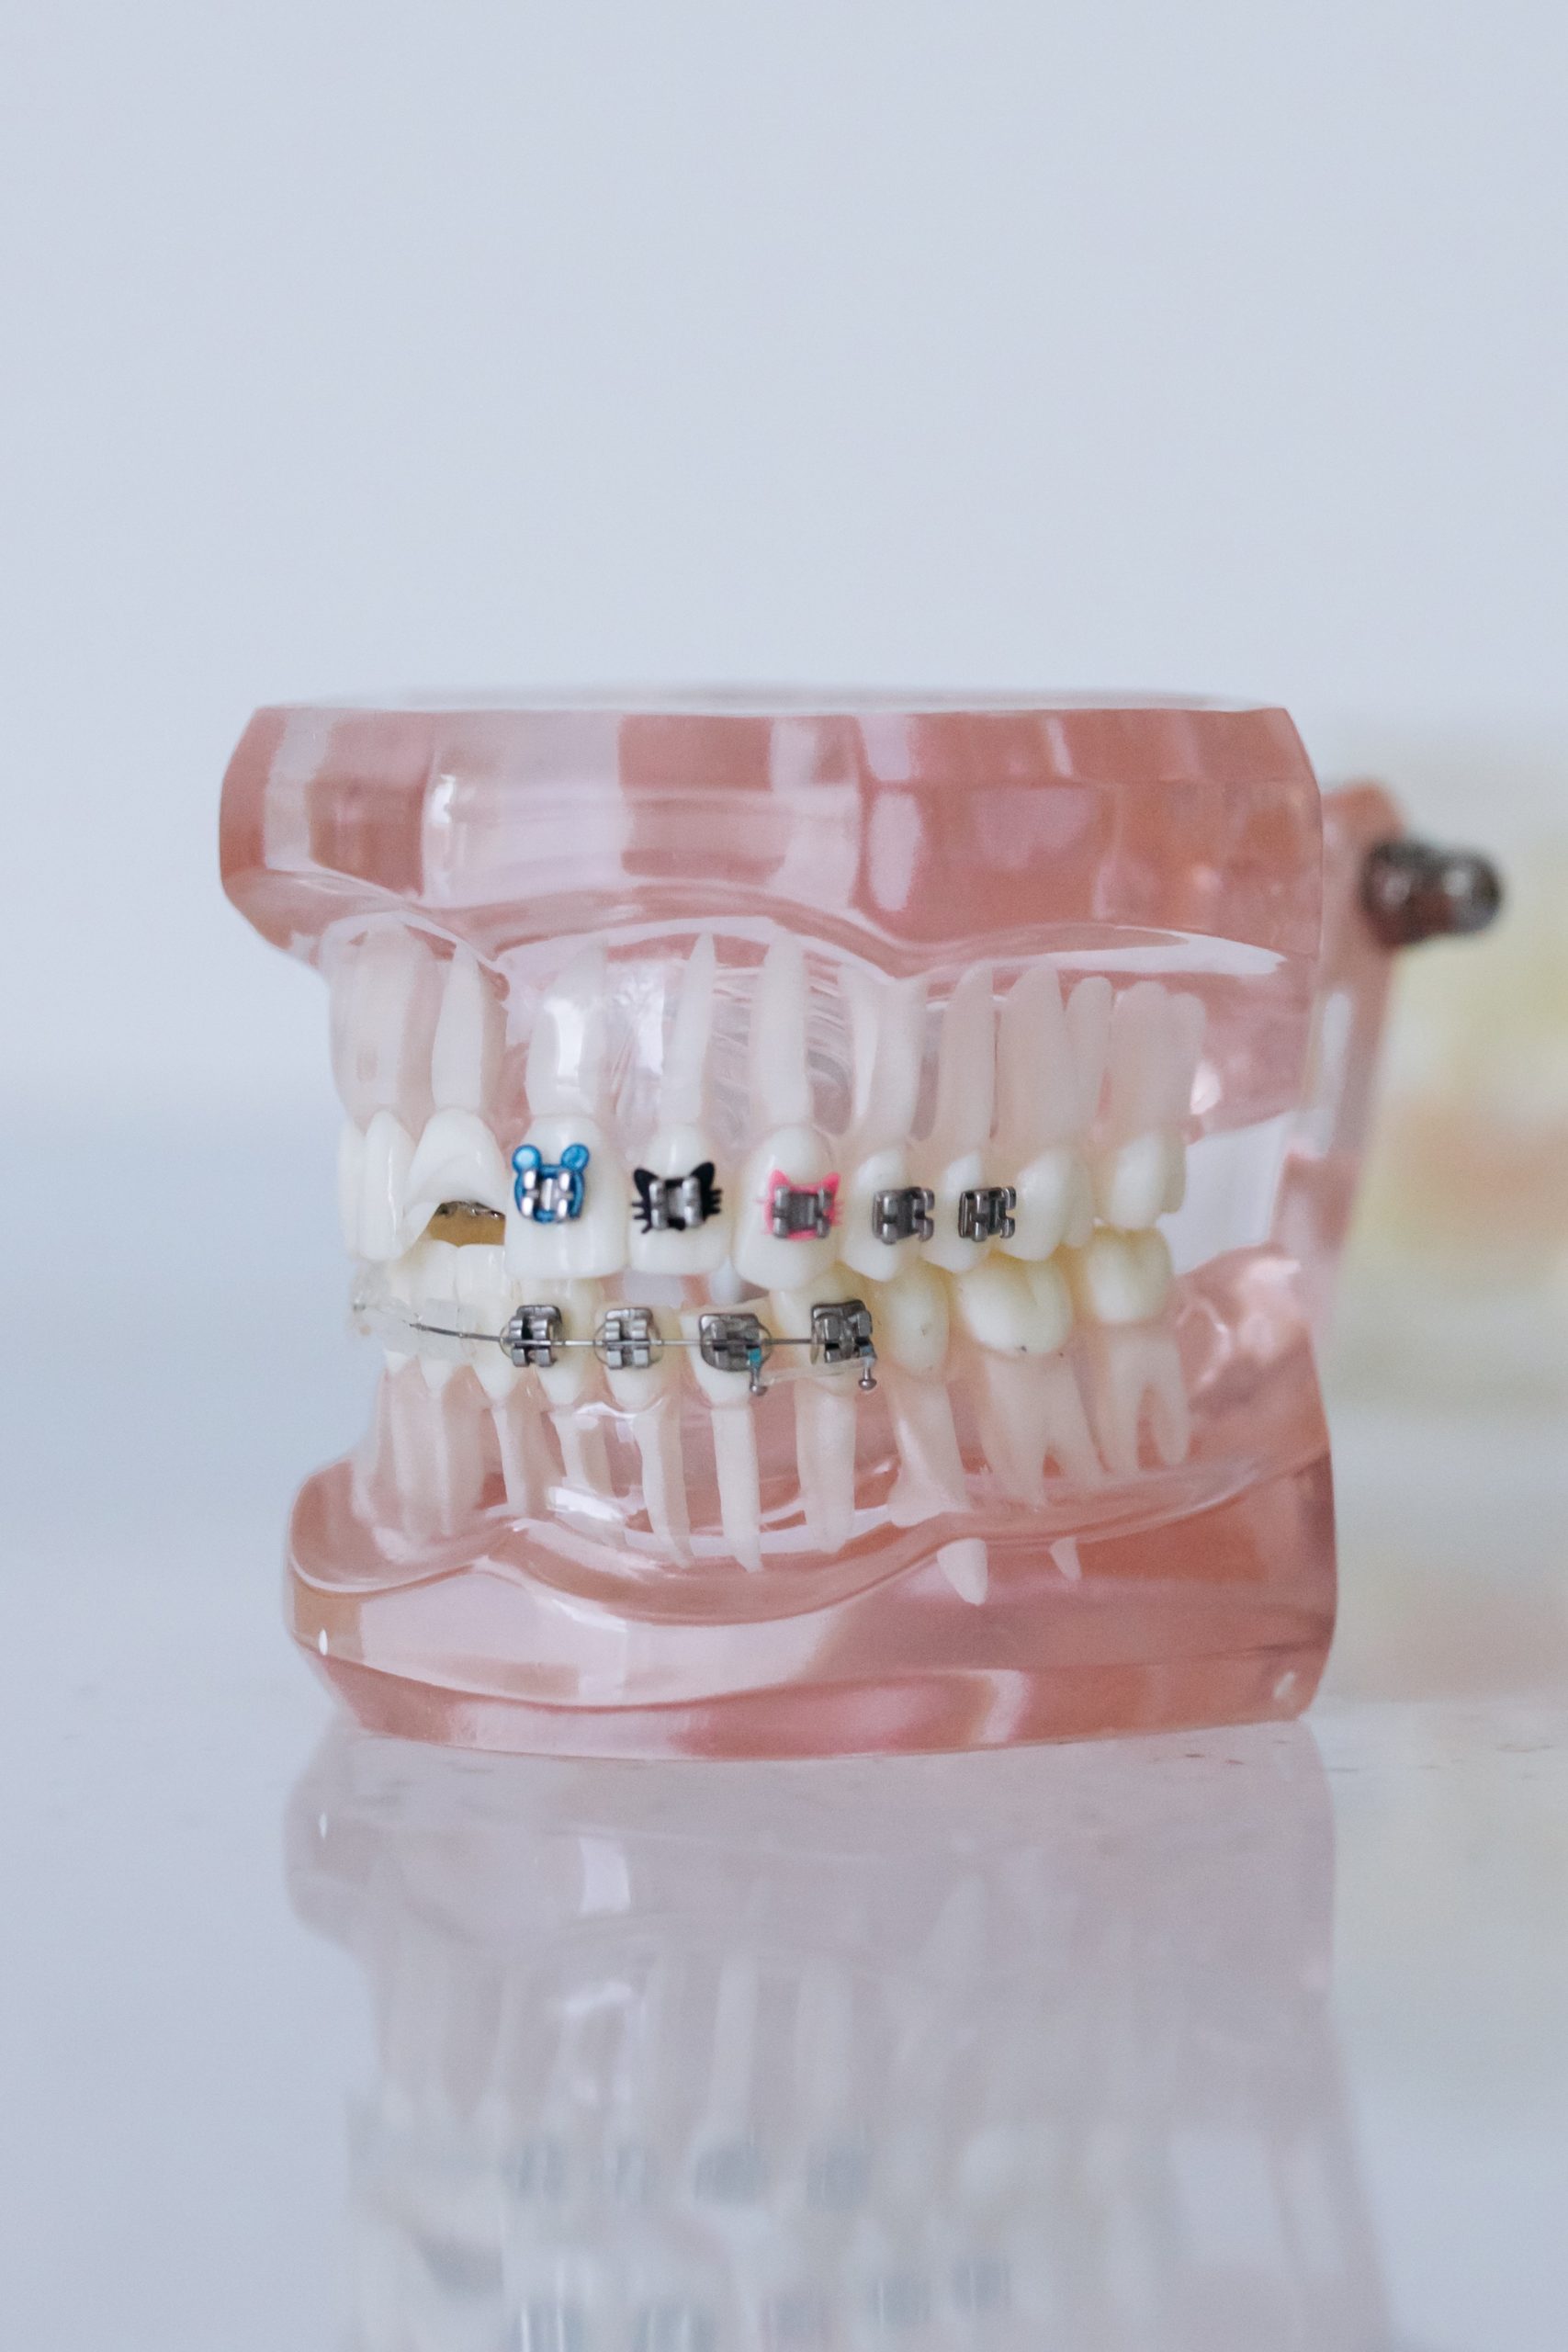 requiring age for orthodontic treatment